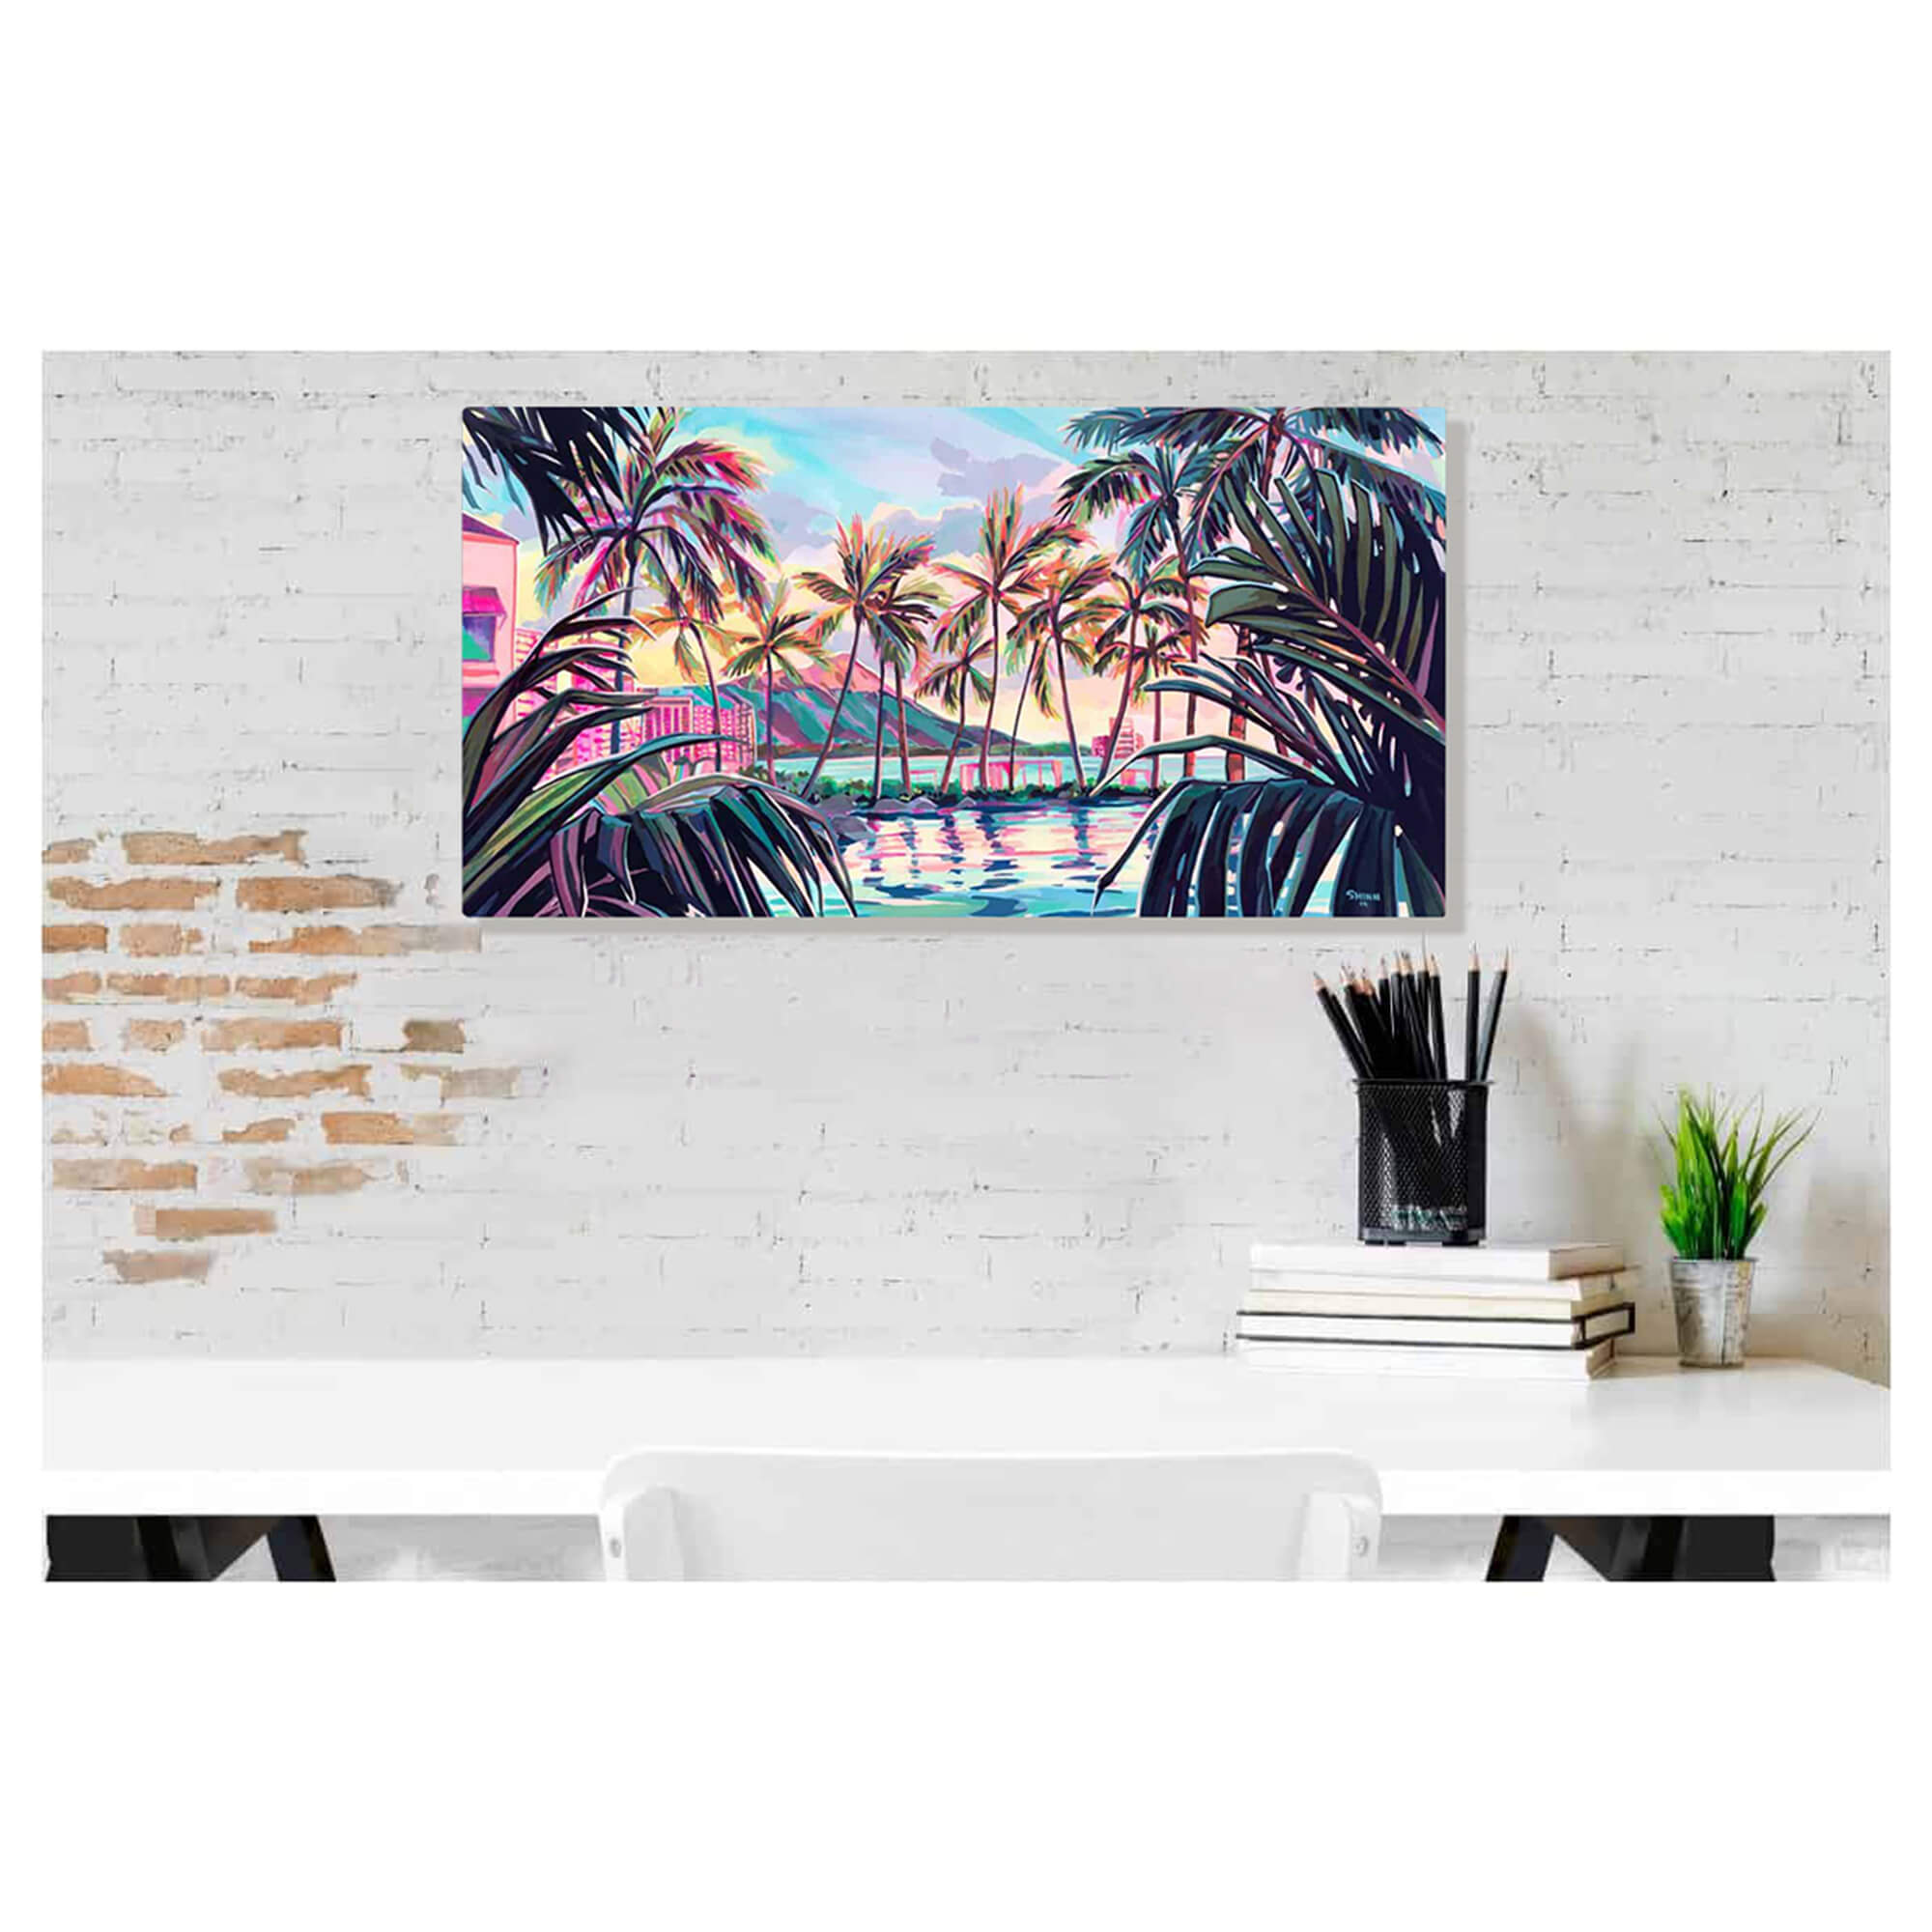 Metal art print of the poolside view as the sun sets on the Sheraton Hotel in Waikiki by Hawaii artist Christie Shinn